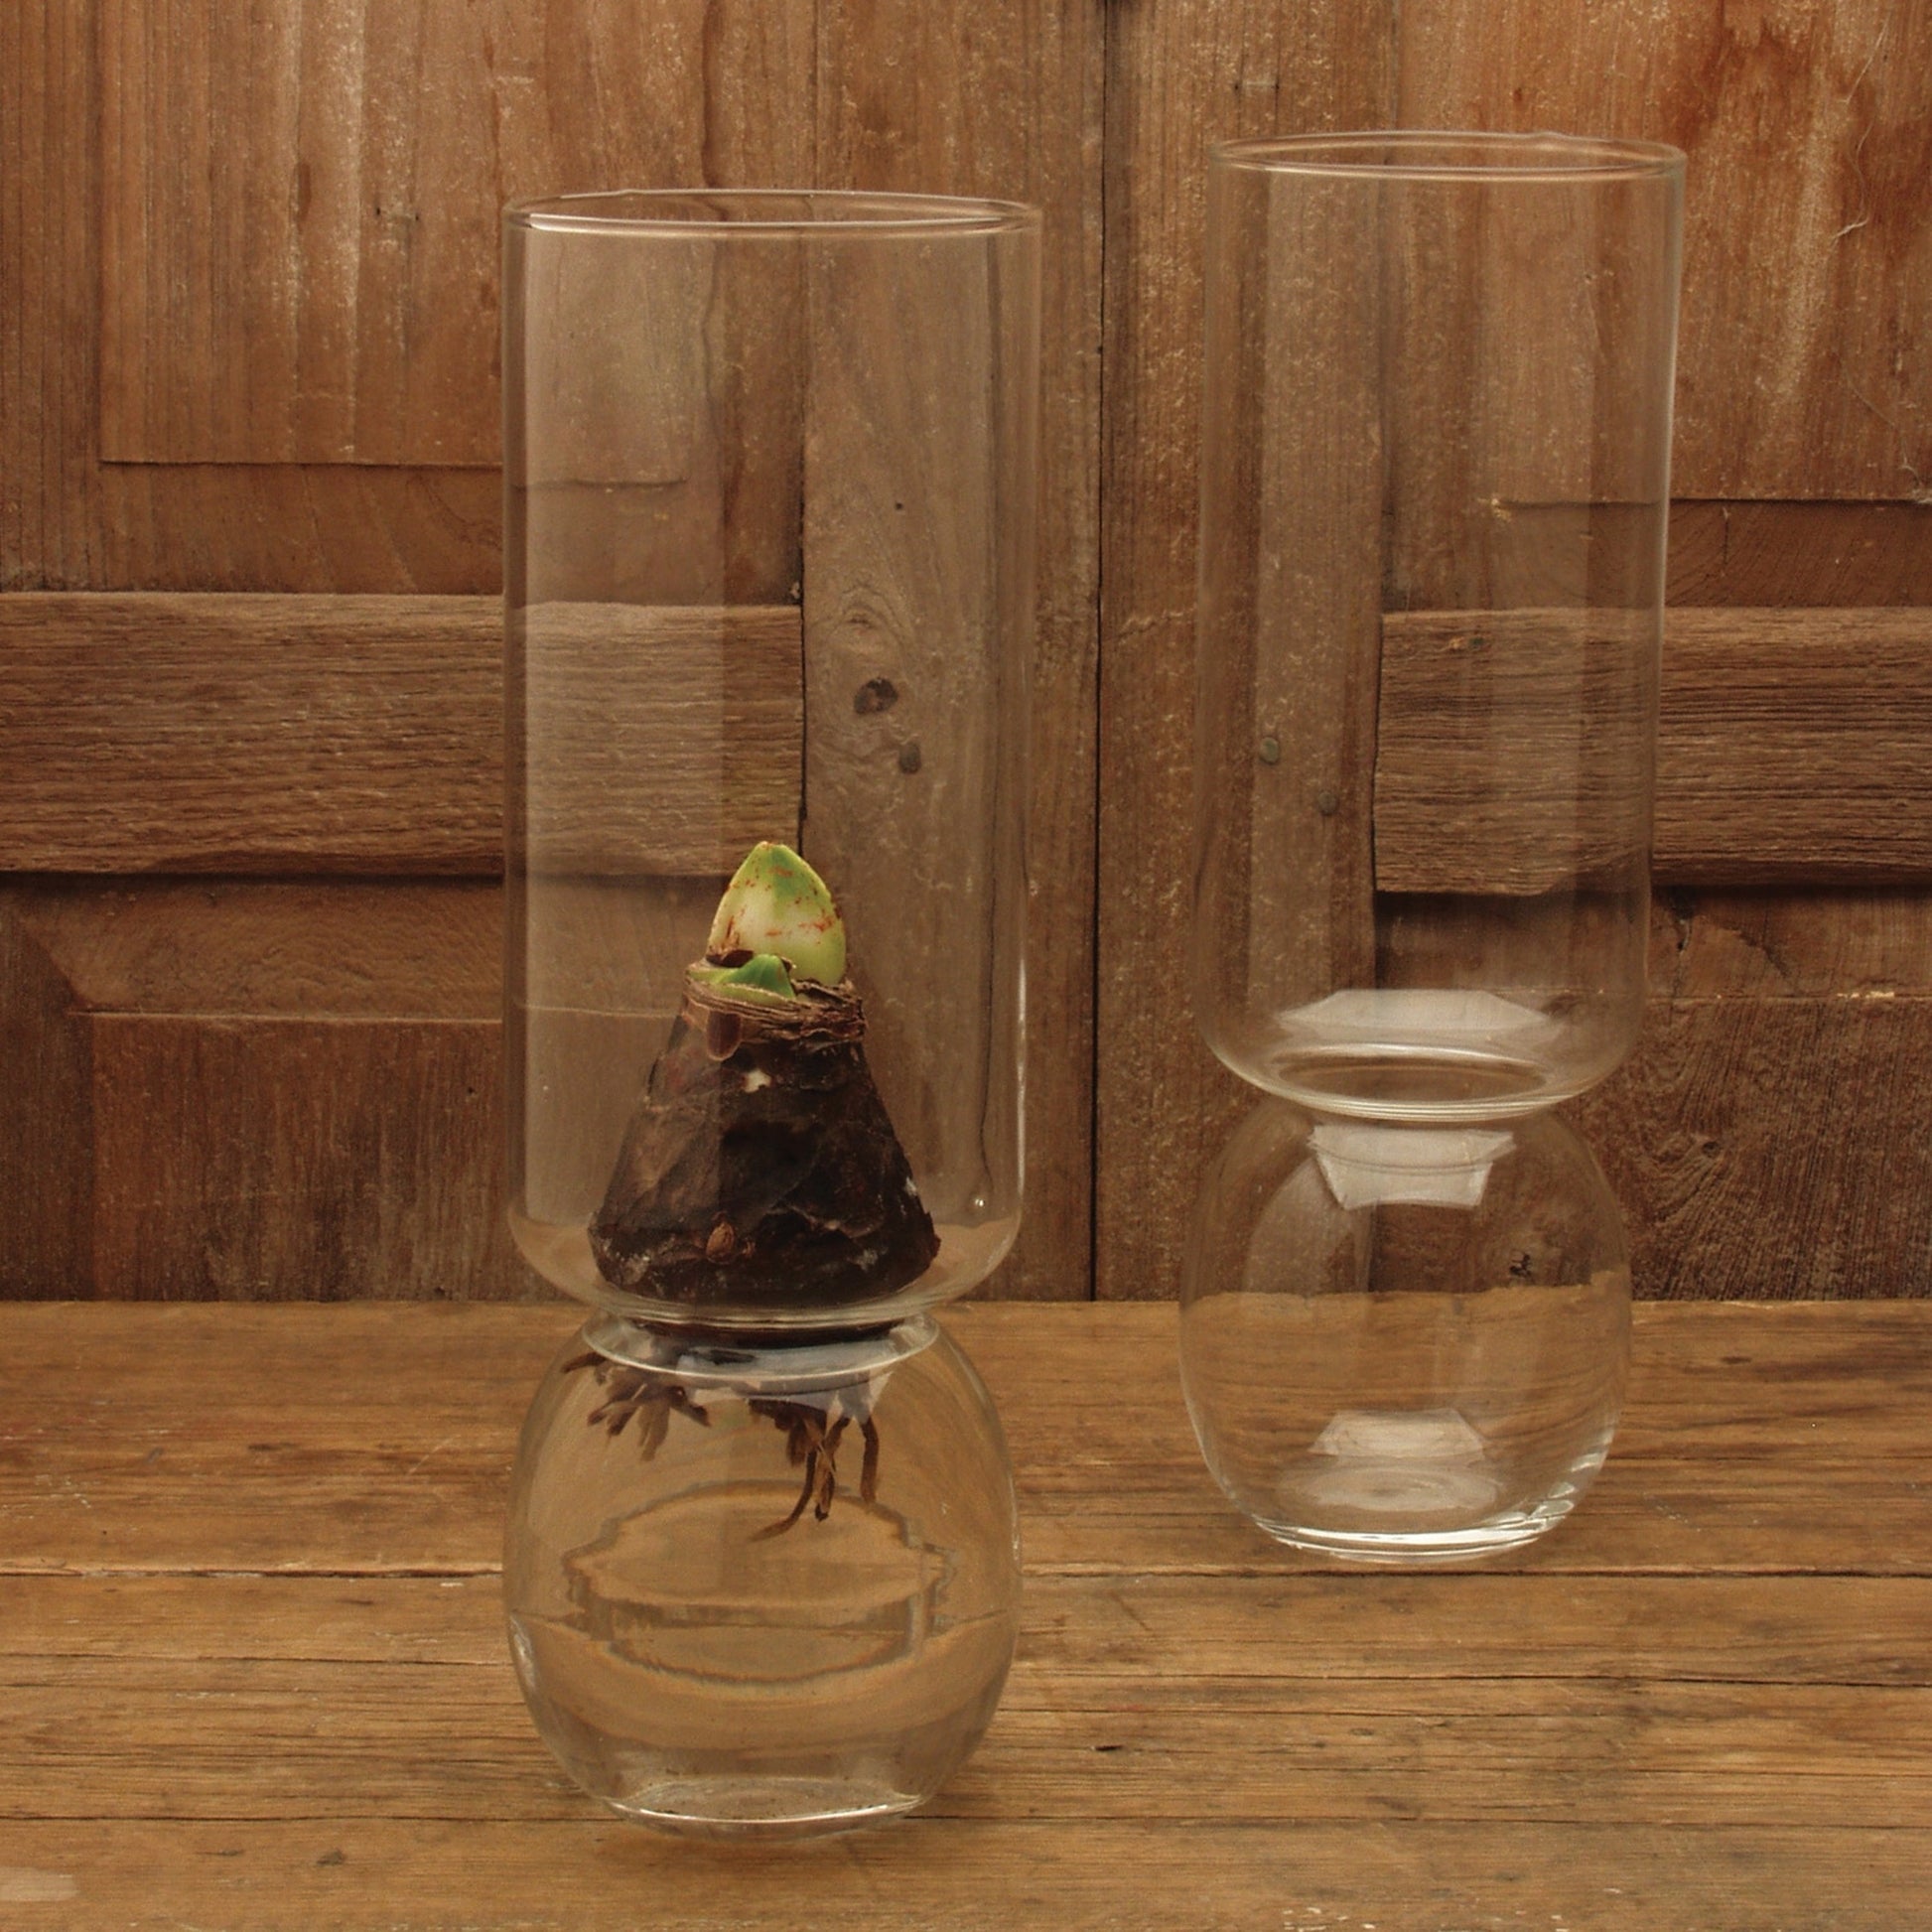 Pair of clear rooting bulb vases with a rooting flower bulb on wooden background